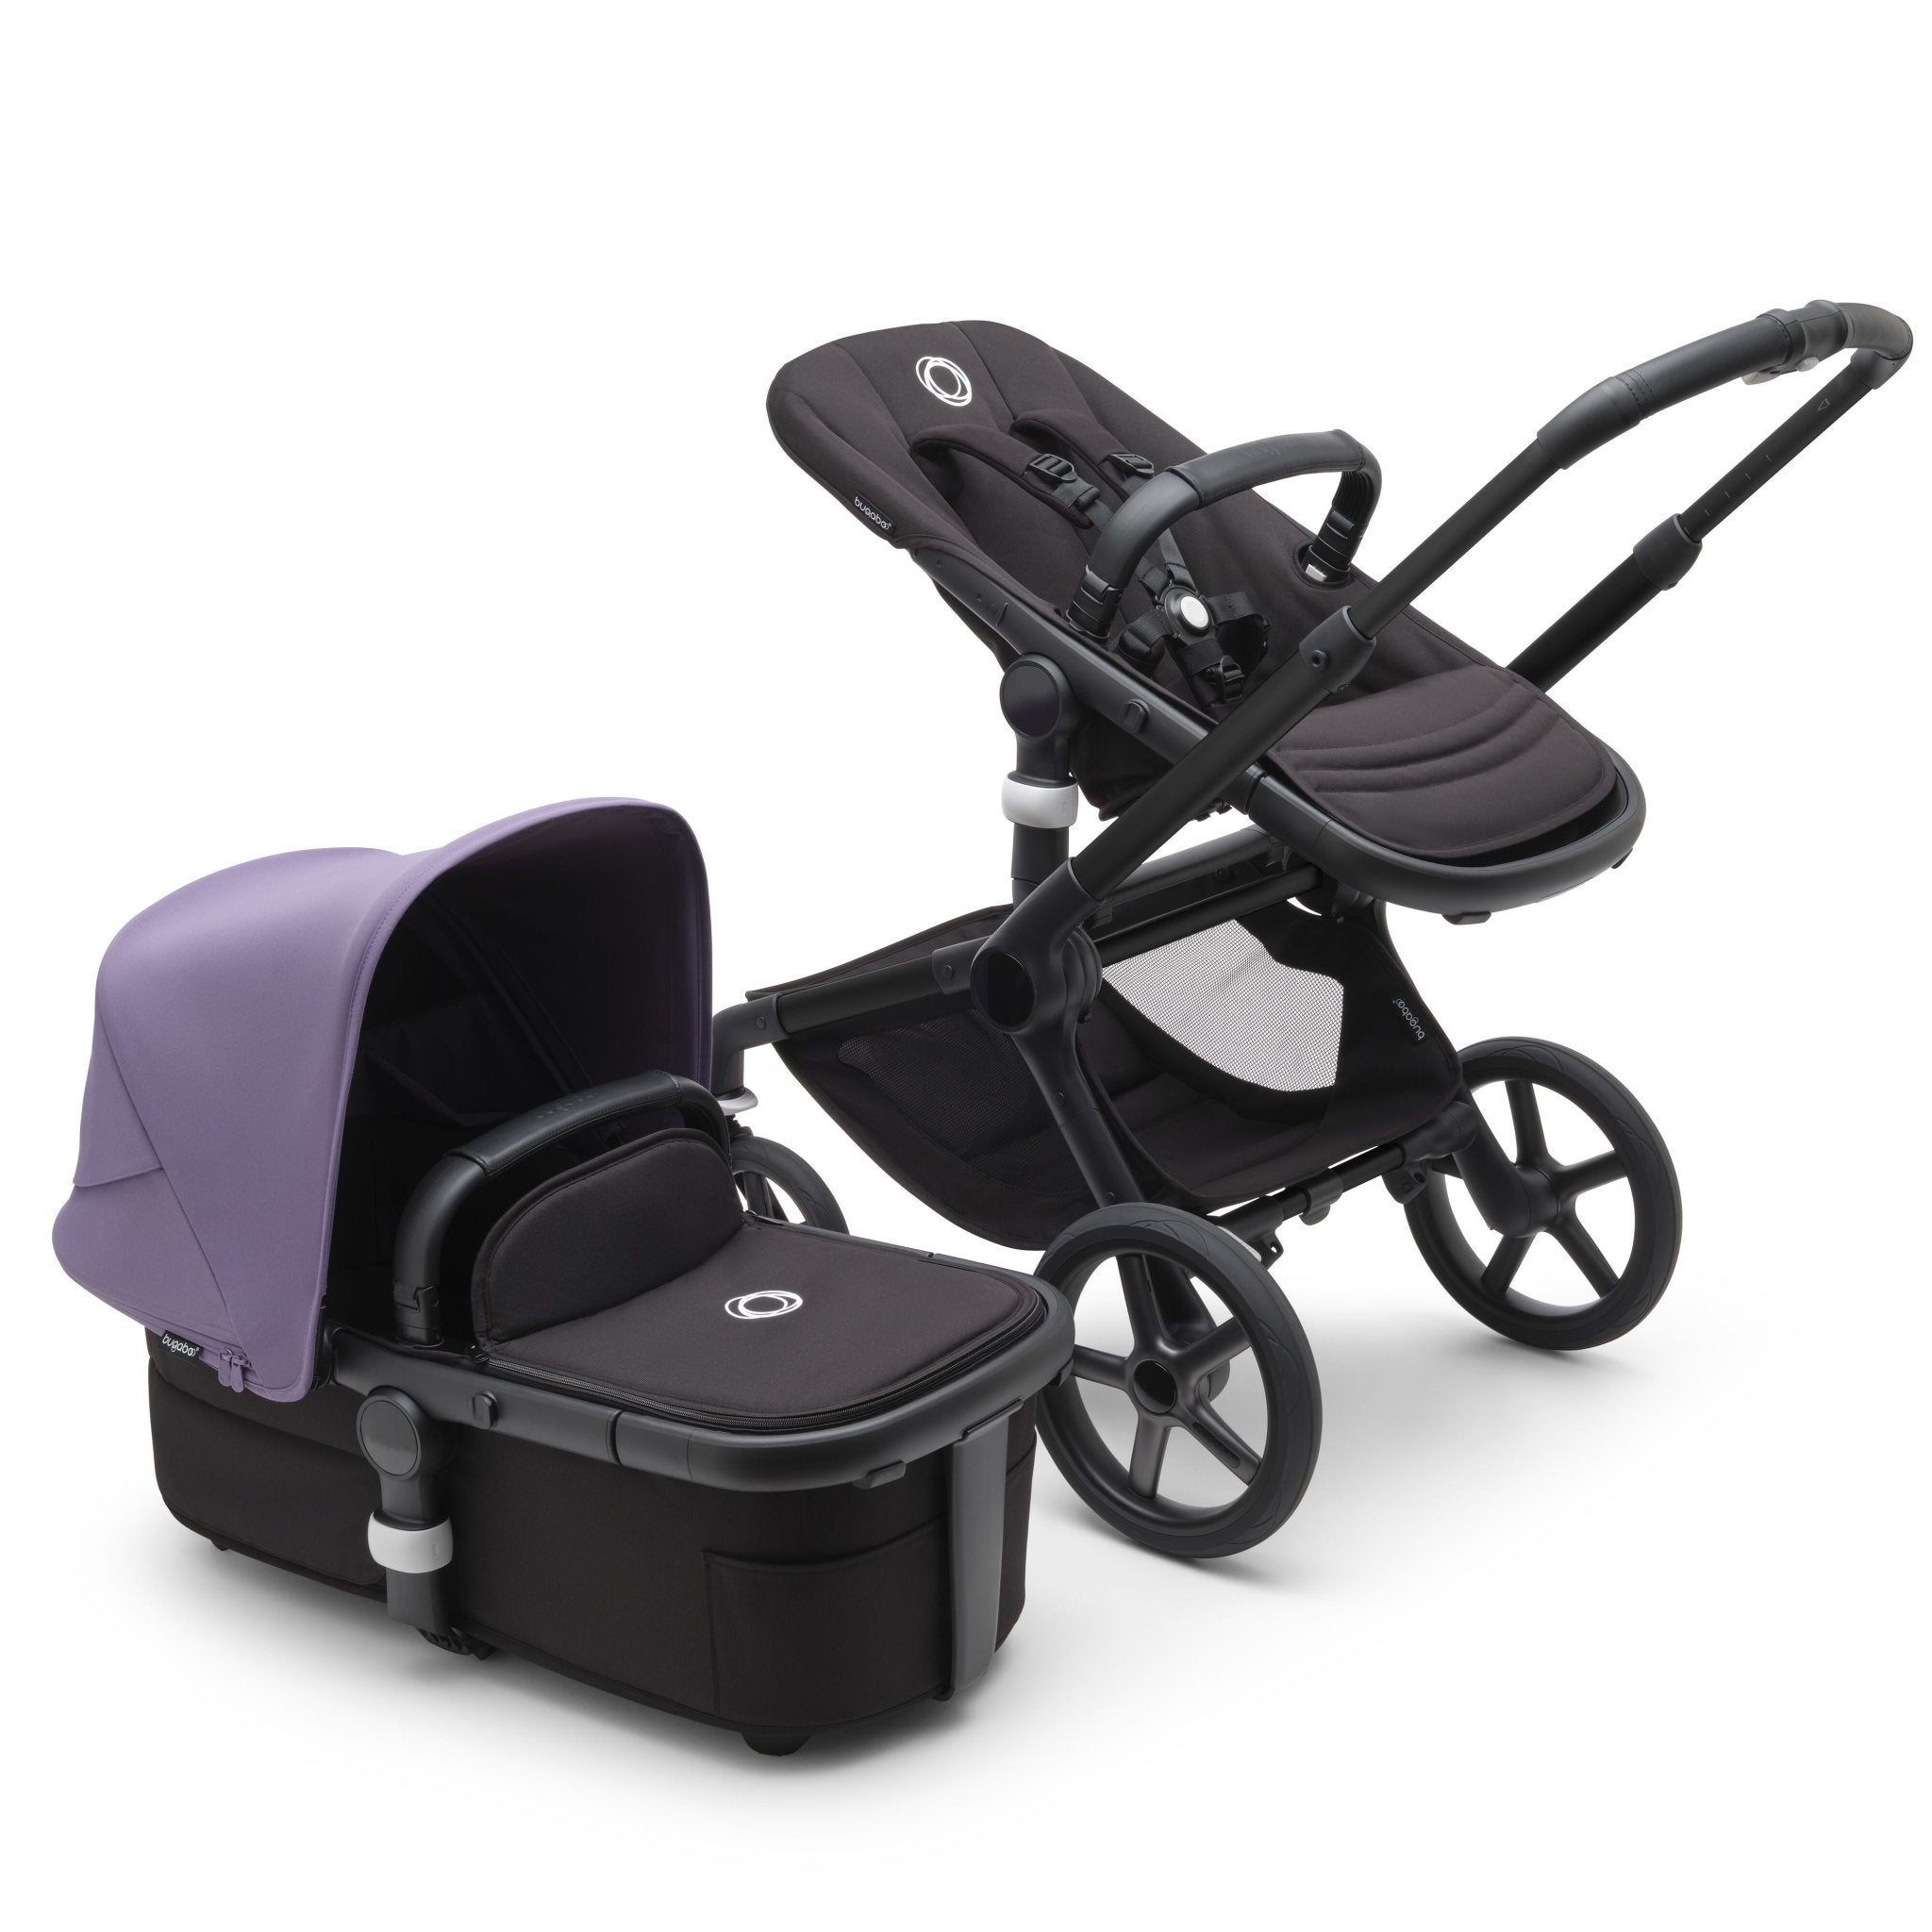 Bugaboo Fox 5 Complete Stroller - ANB Baby -8717447312567$1000 - $2000